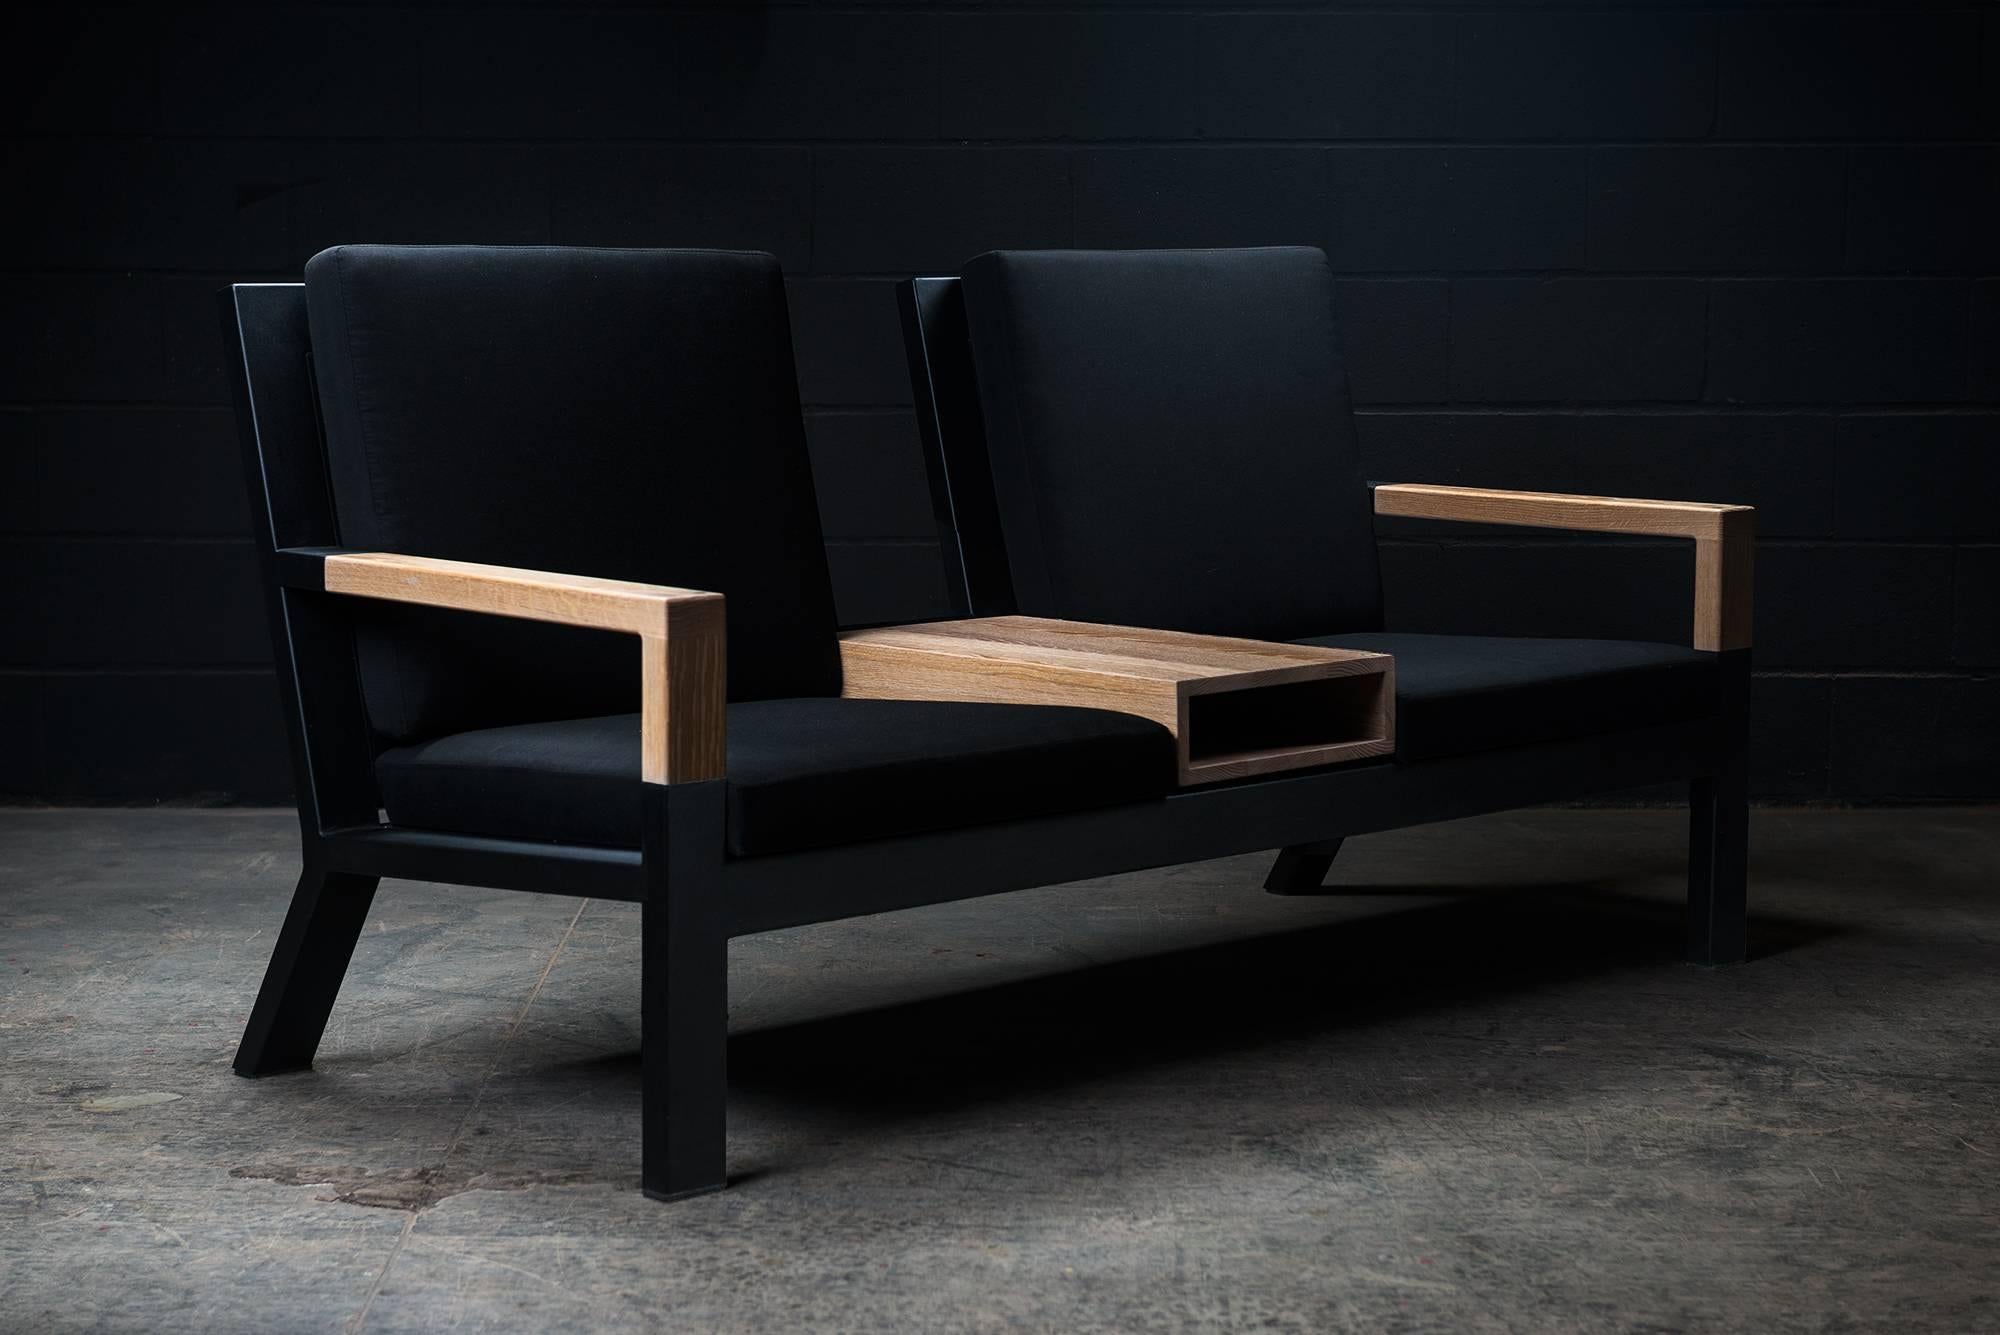 The Baltimore modern armchair duo or loveseat is handmade to order from our unique Ambrozia black textured steel tubing frame design with a backchair in solid wood slats and wooden arms. Stainproof and UV resistant upholstestry in Sunbrella fabrics.